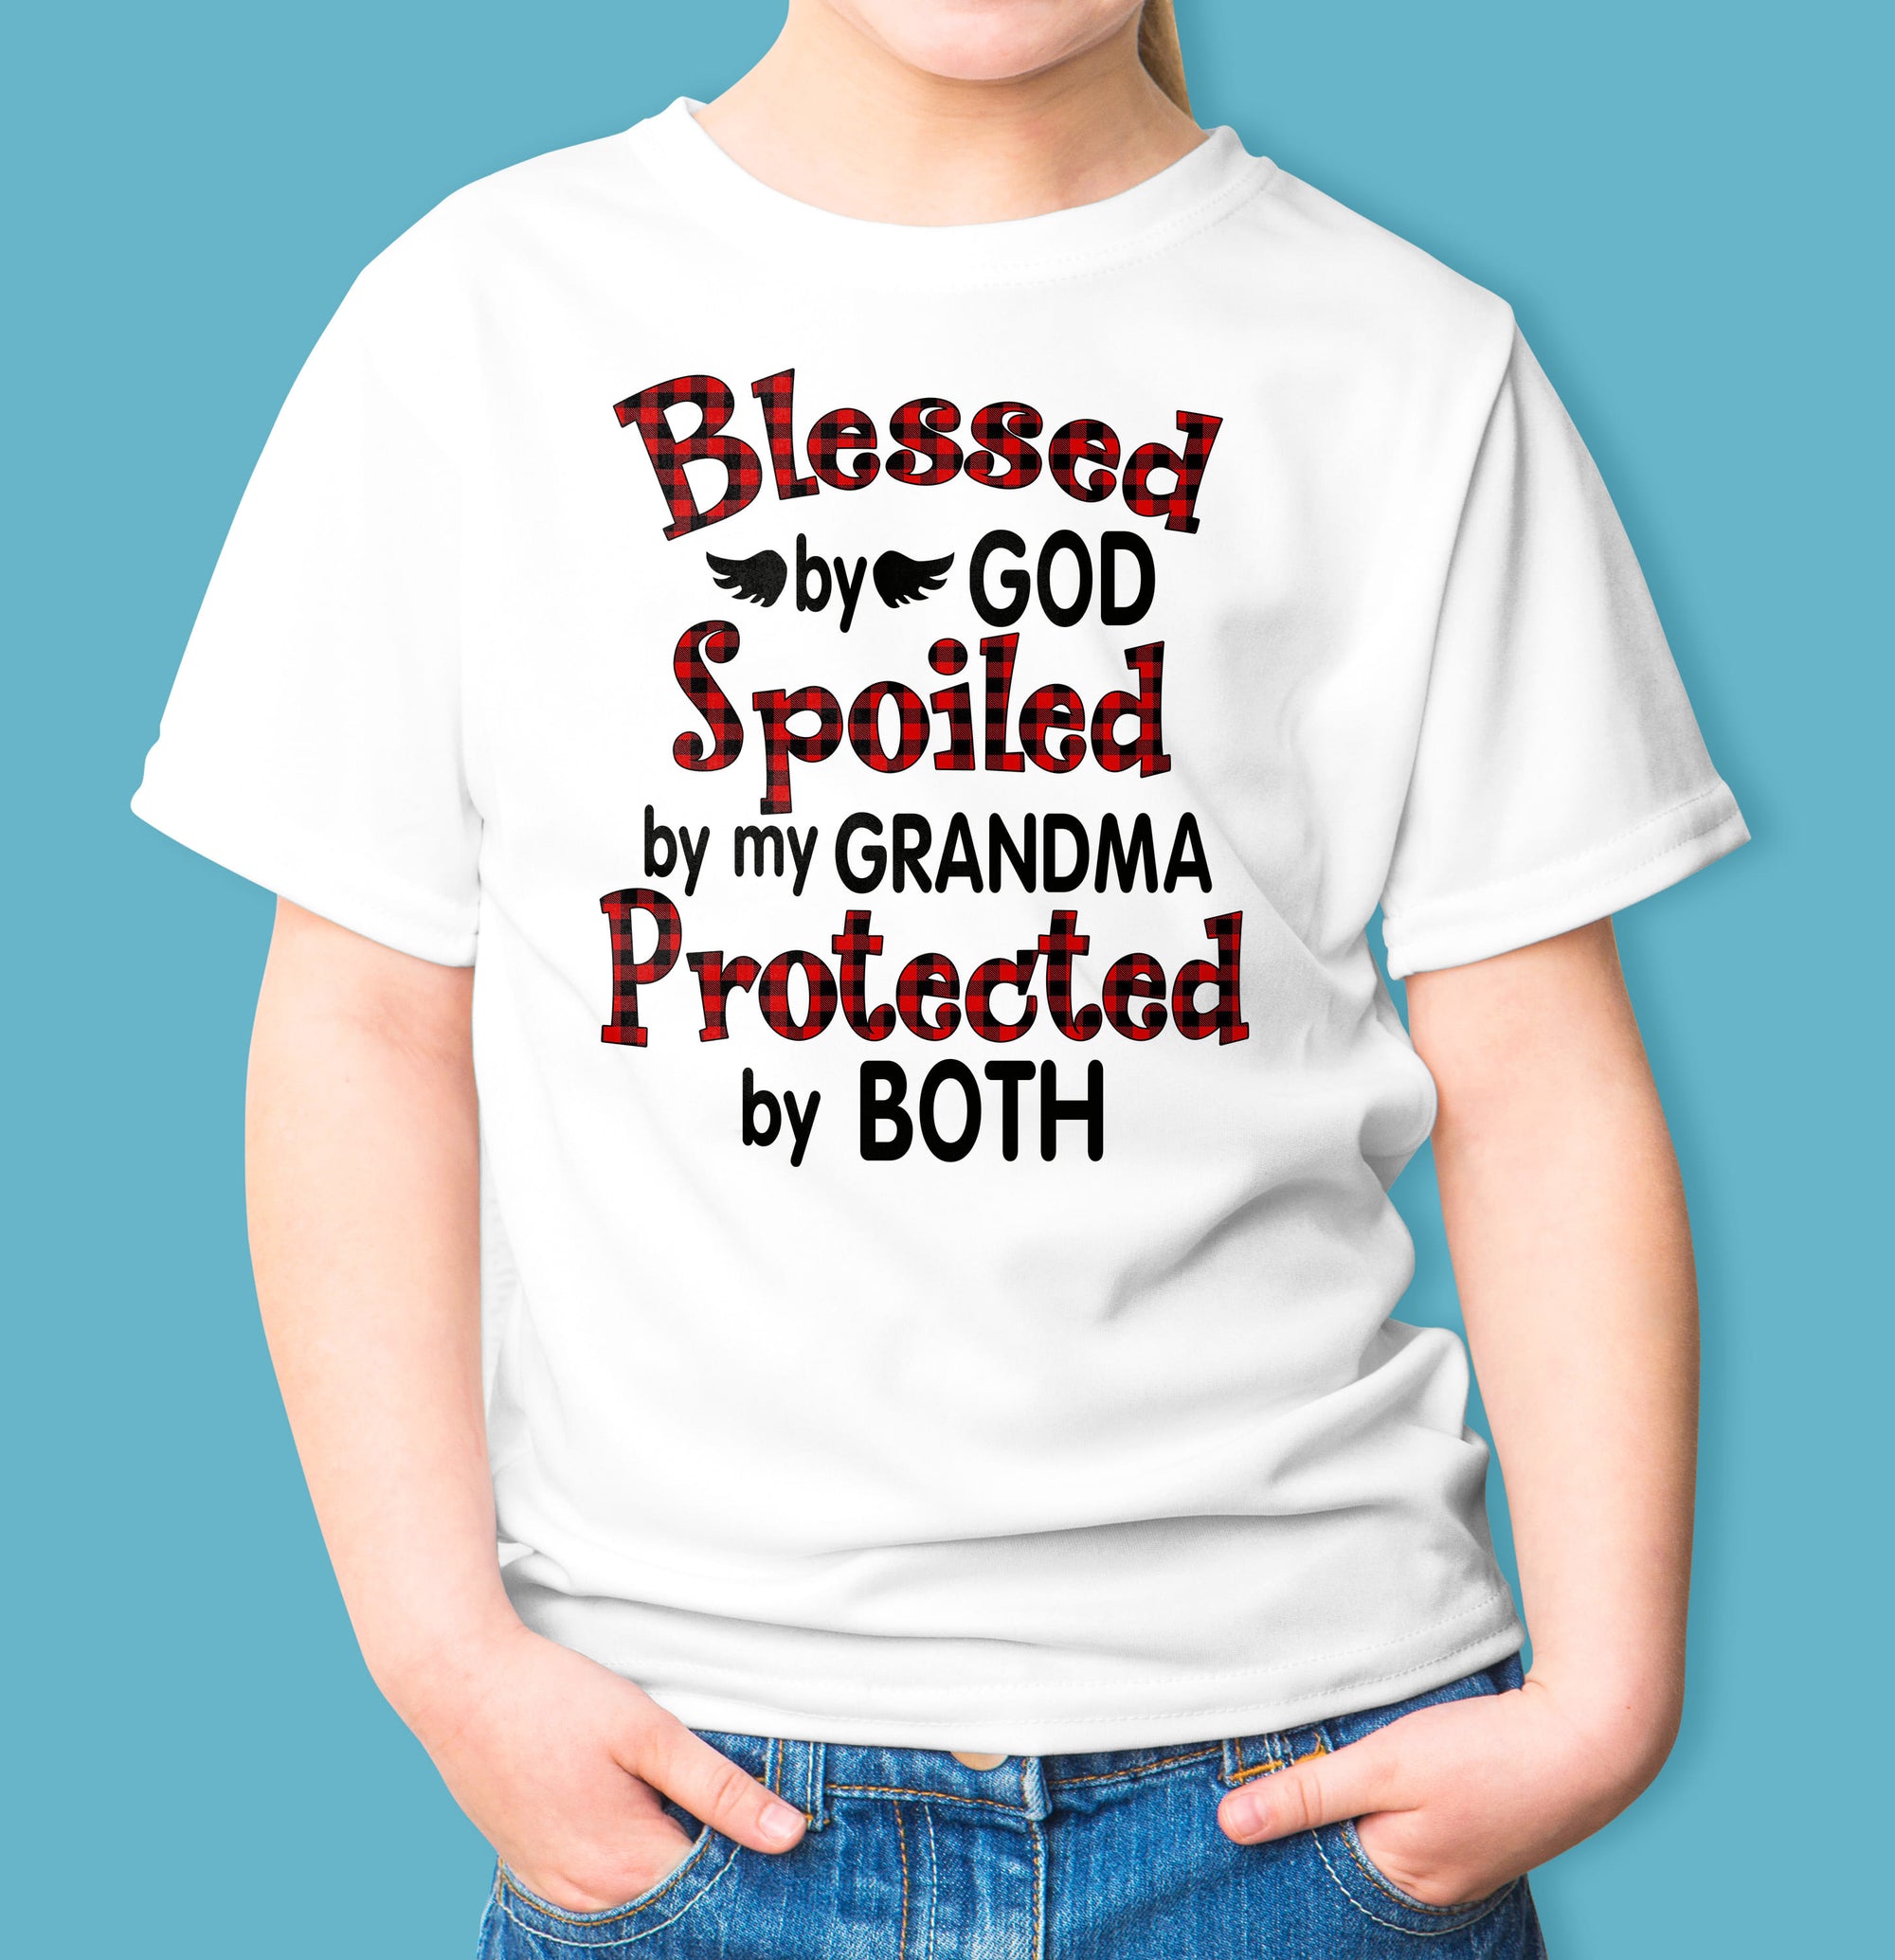 Blessed by God, Spoiled by my Grandma - Jesus Kid White T-shirt